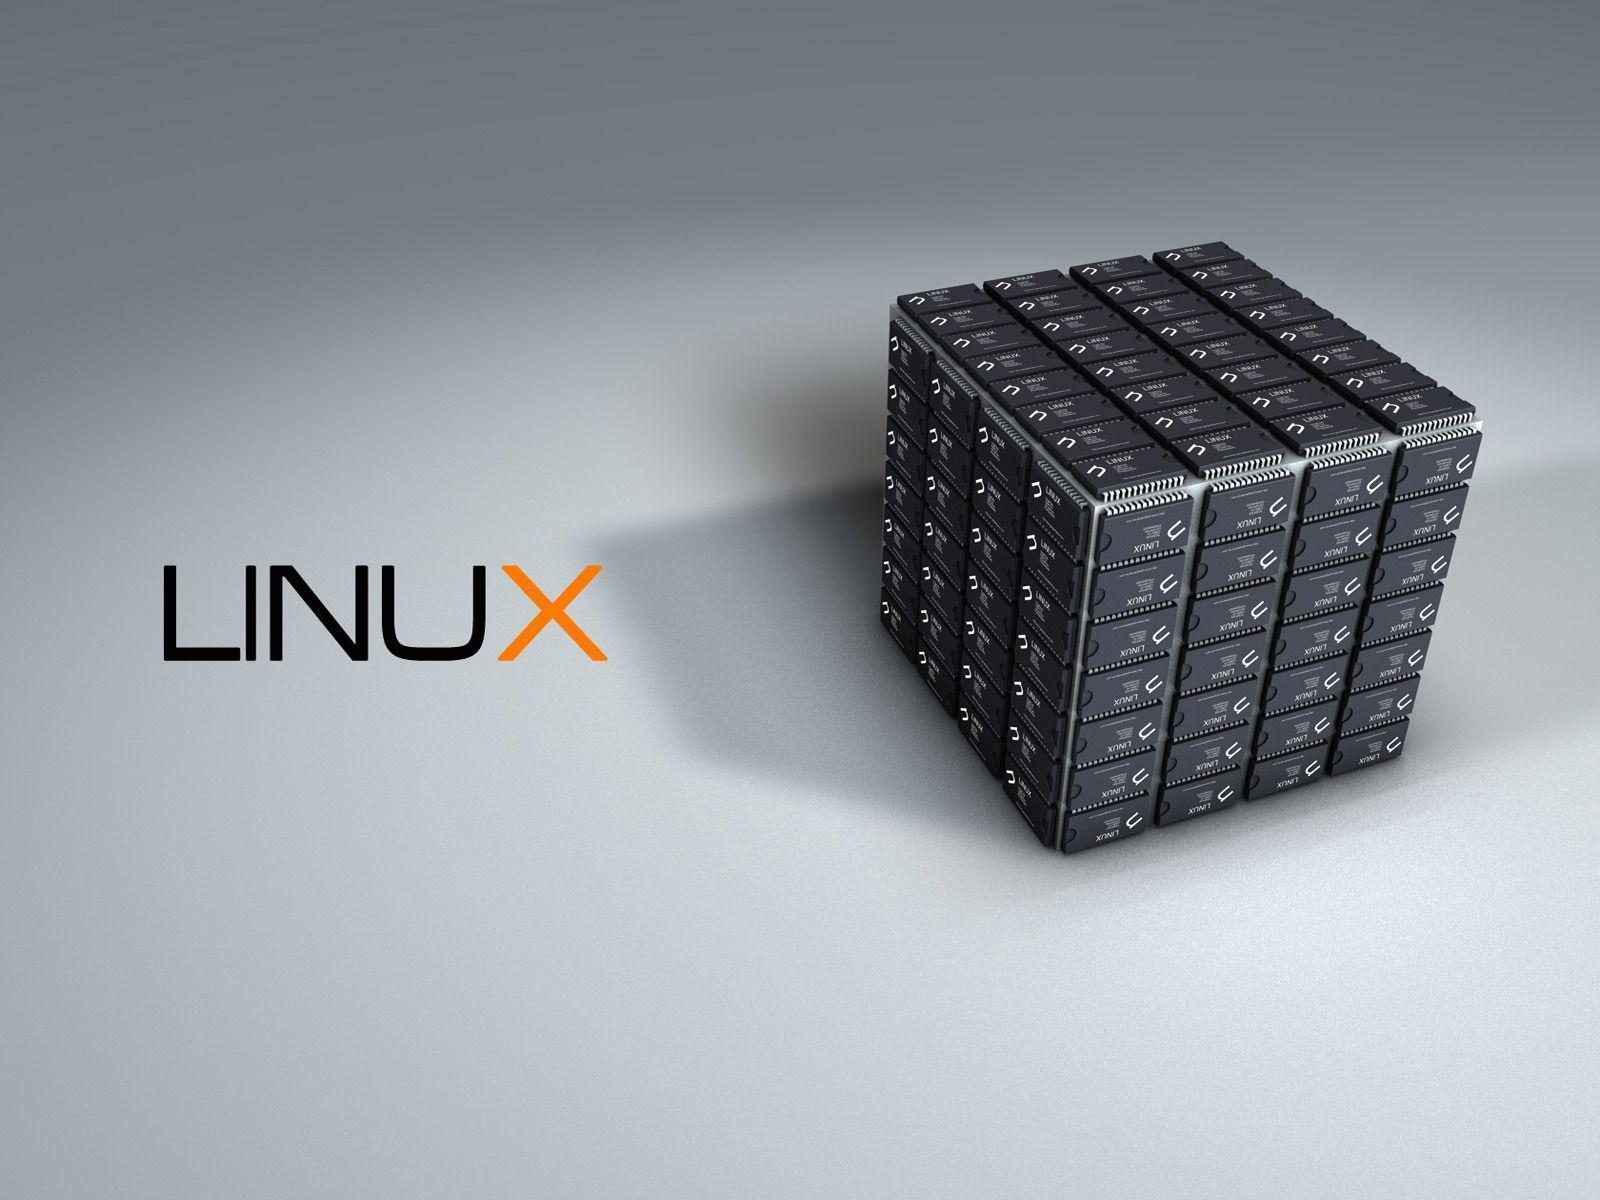 Linux CPU Cube Wallpapers Linux Computers Wallpapers in jpg format